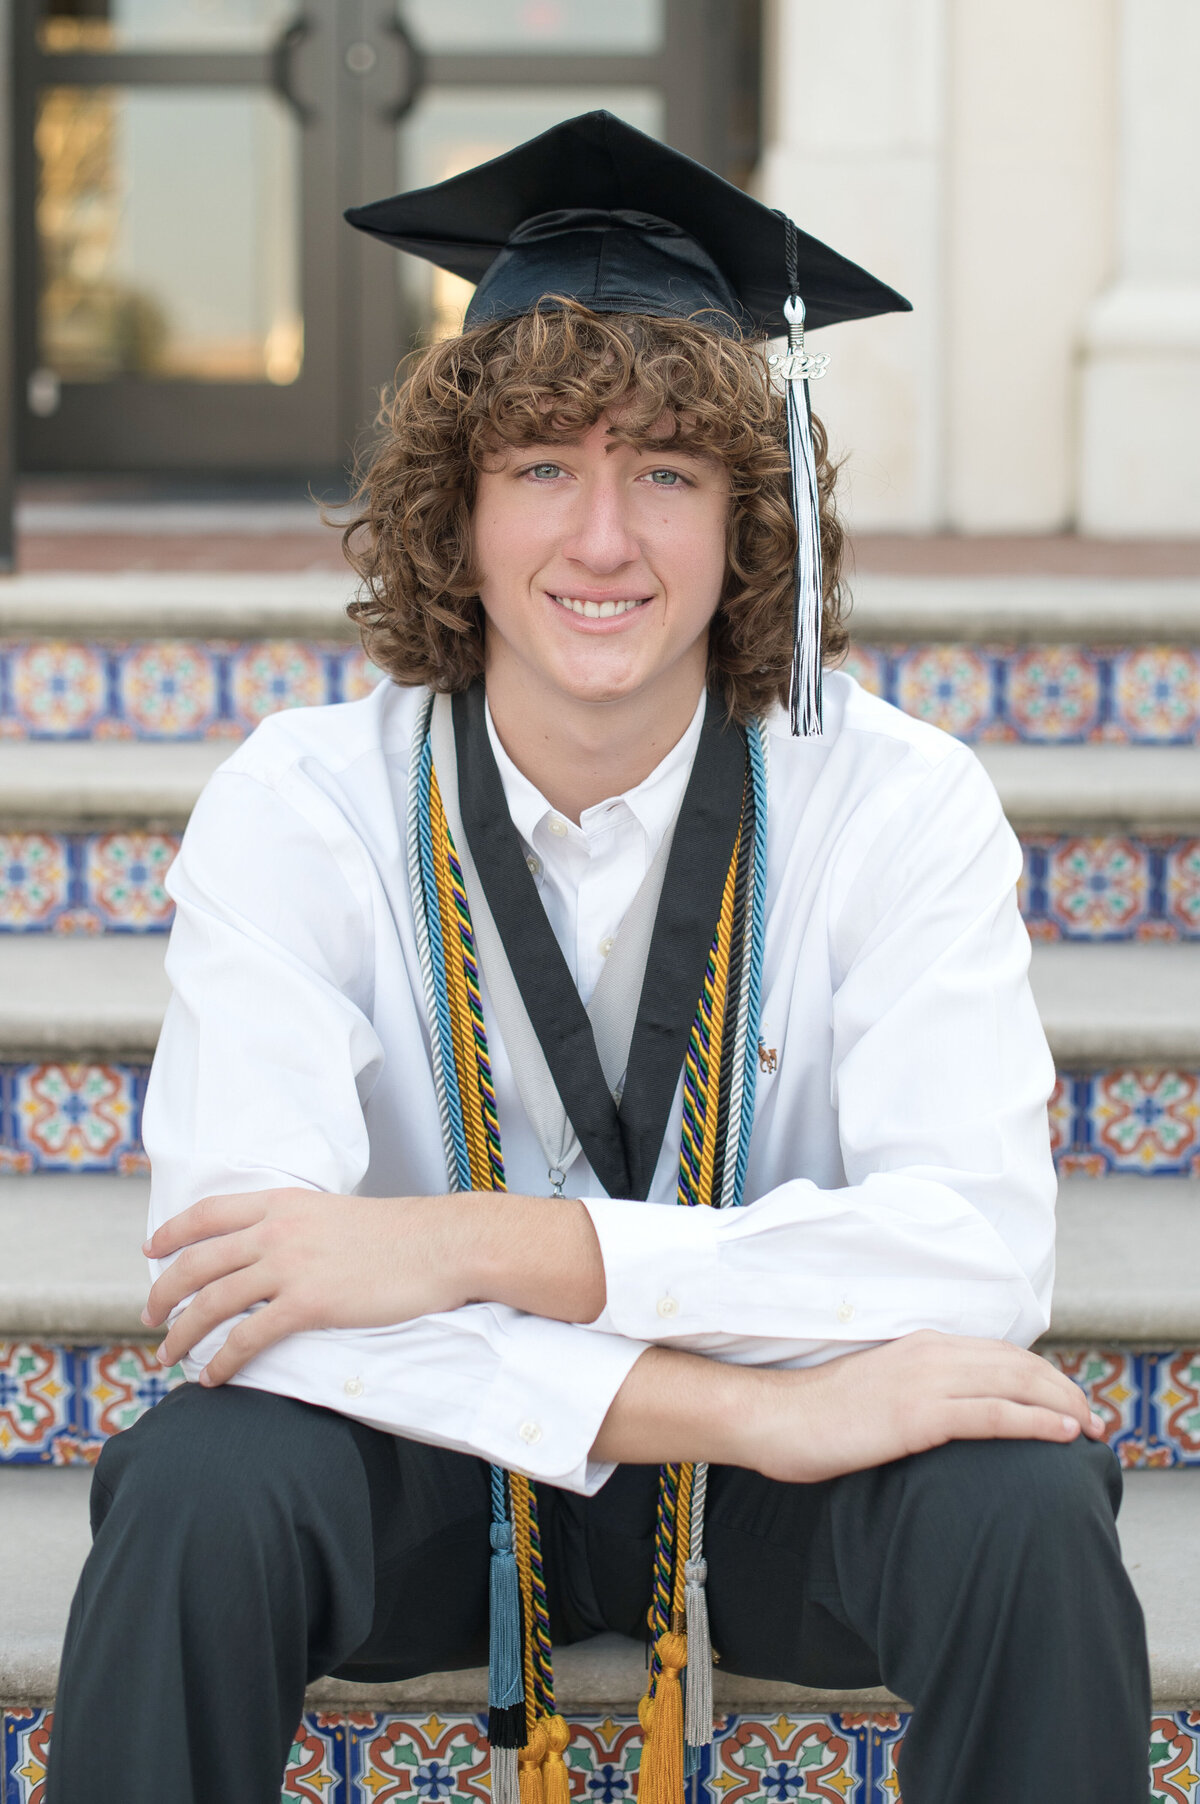 High school senior boy sitting on steps with cap and honors cords smiling at the camera.